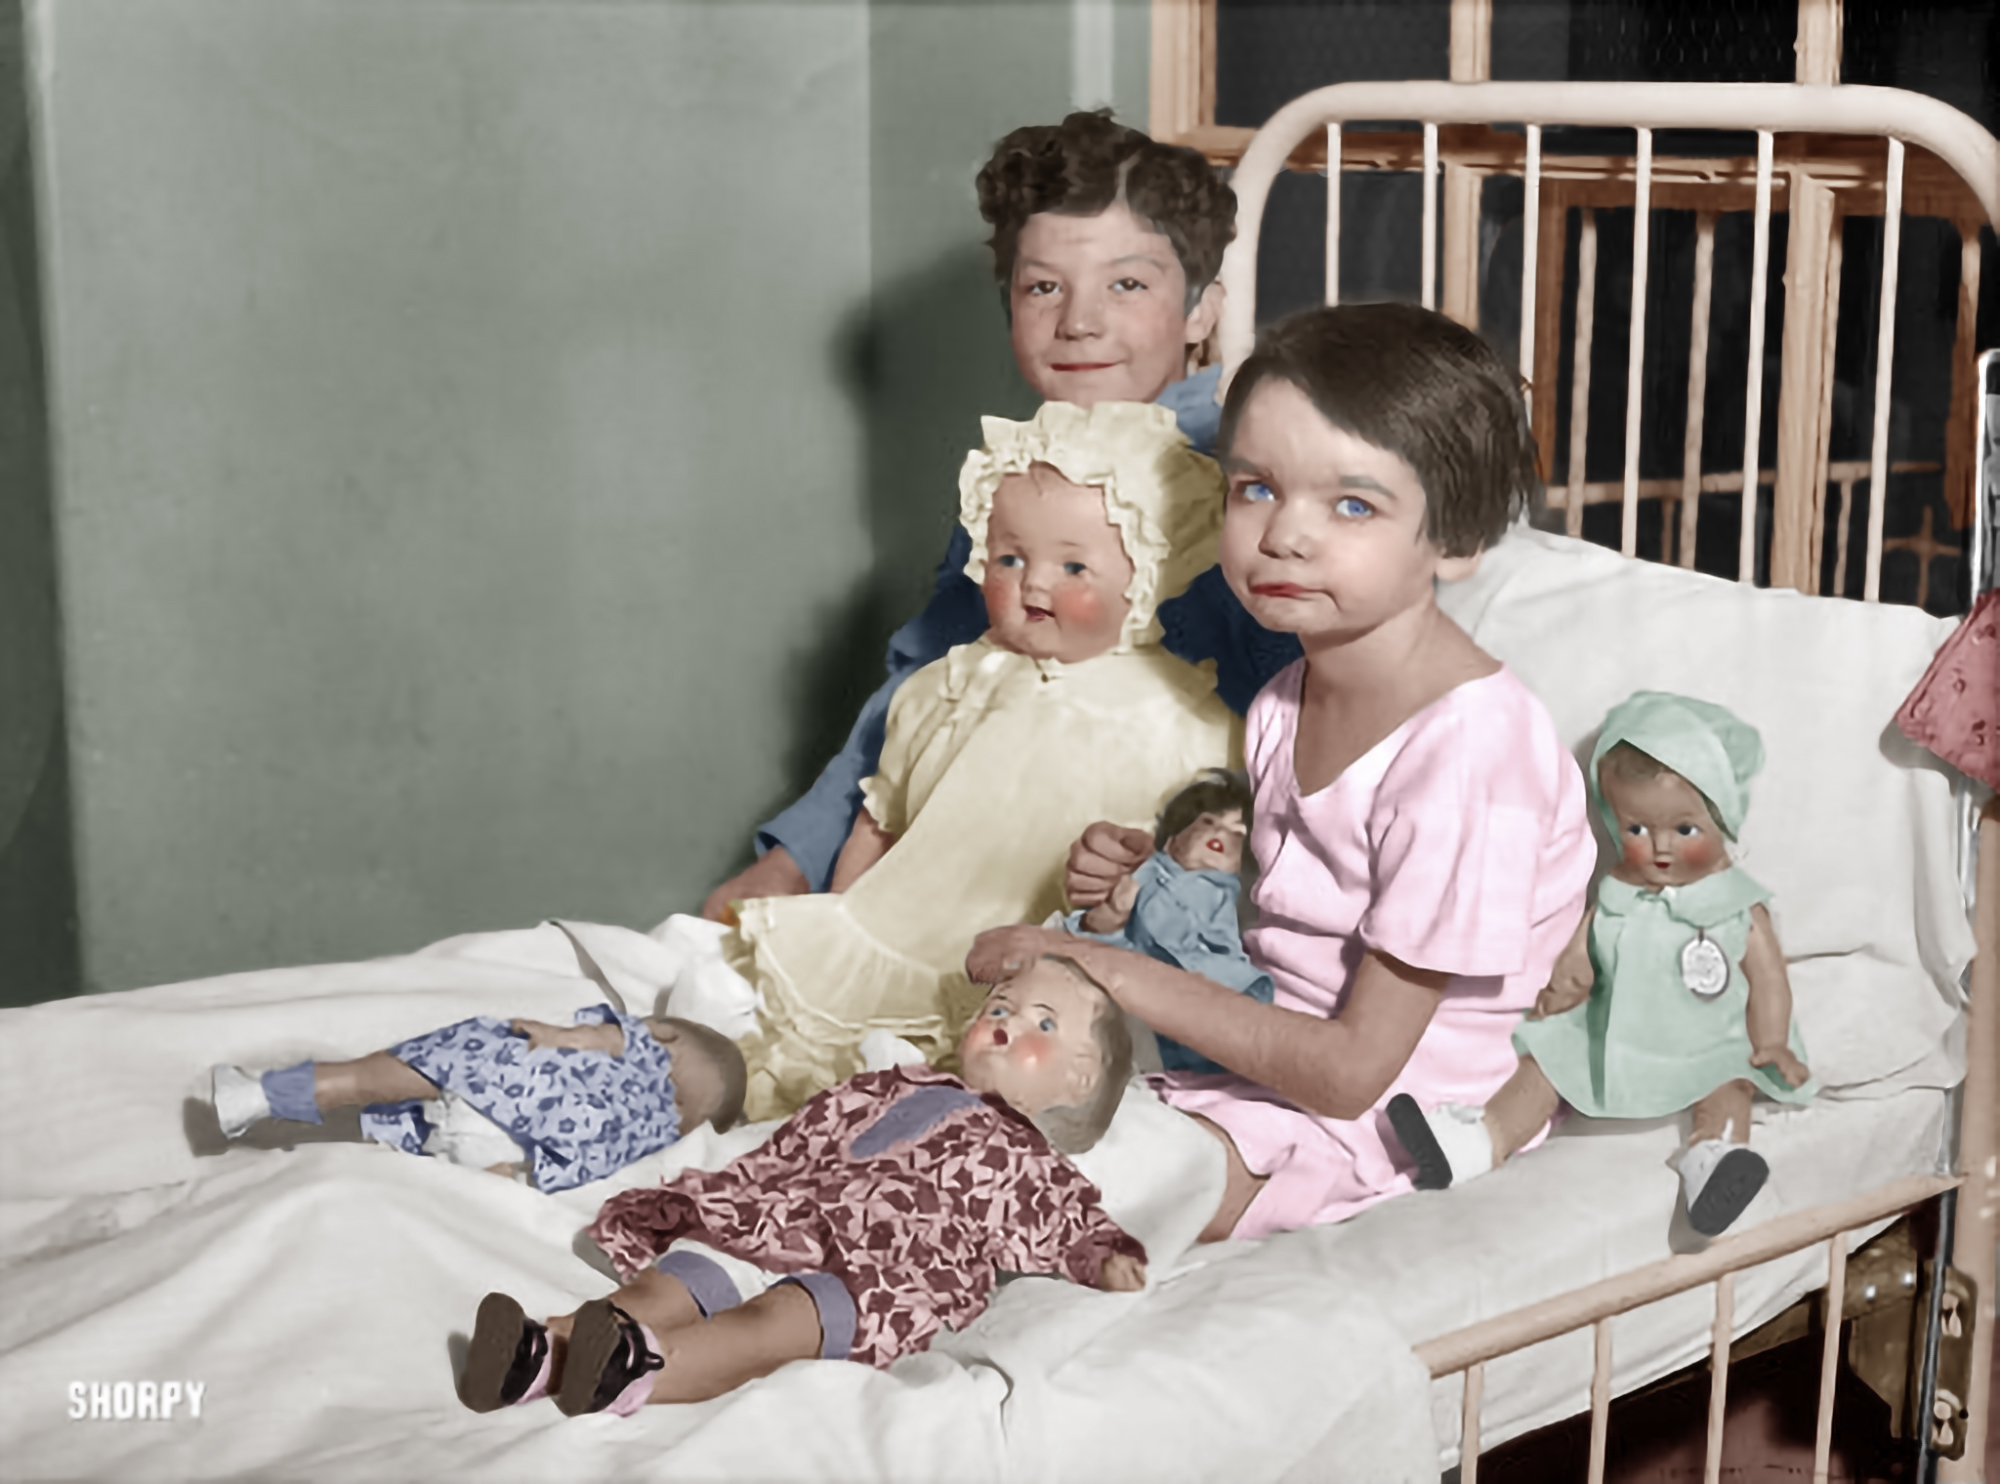 Colorized version of this image showing "children in hospital bed with dolls." Washington, D.C., 1931. Harris & Ewing glass negative. 

This is what children did before computers, cell phones and social media. We may have made great gains in technology, but in my opinion, we lost a lot.